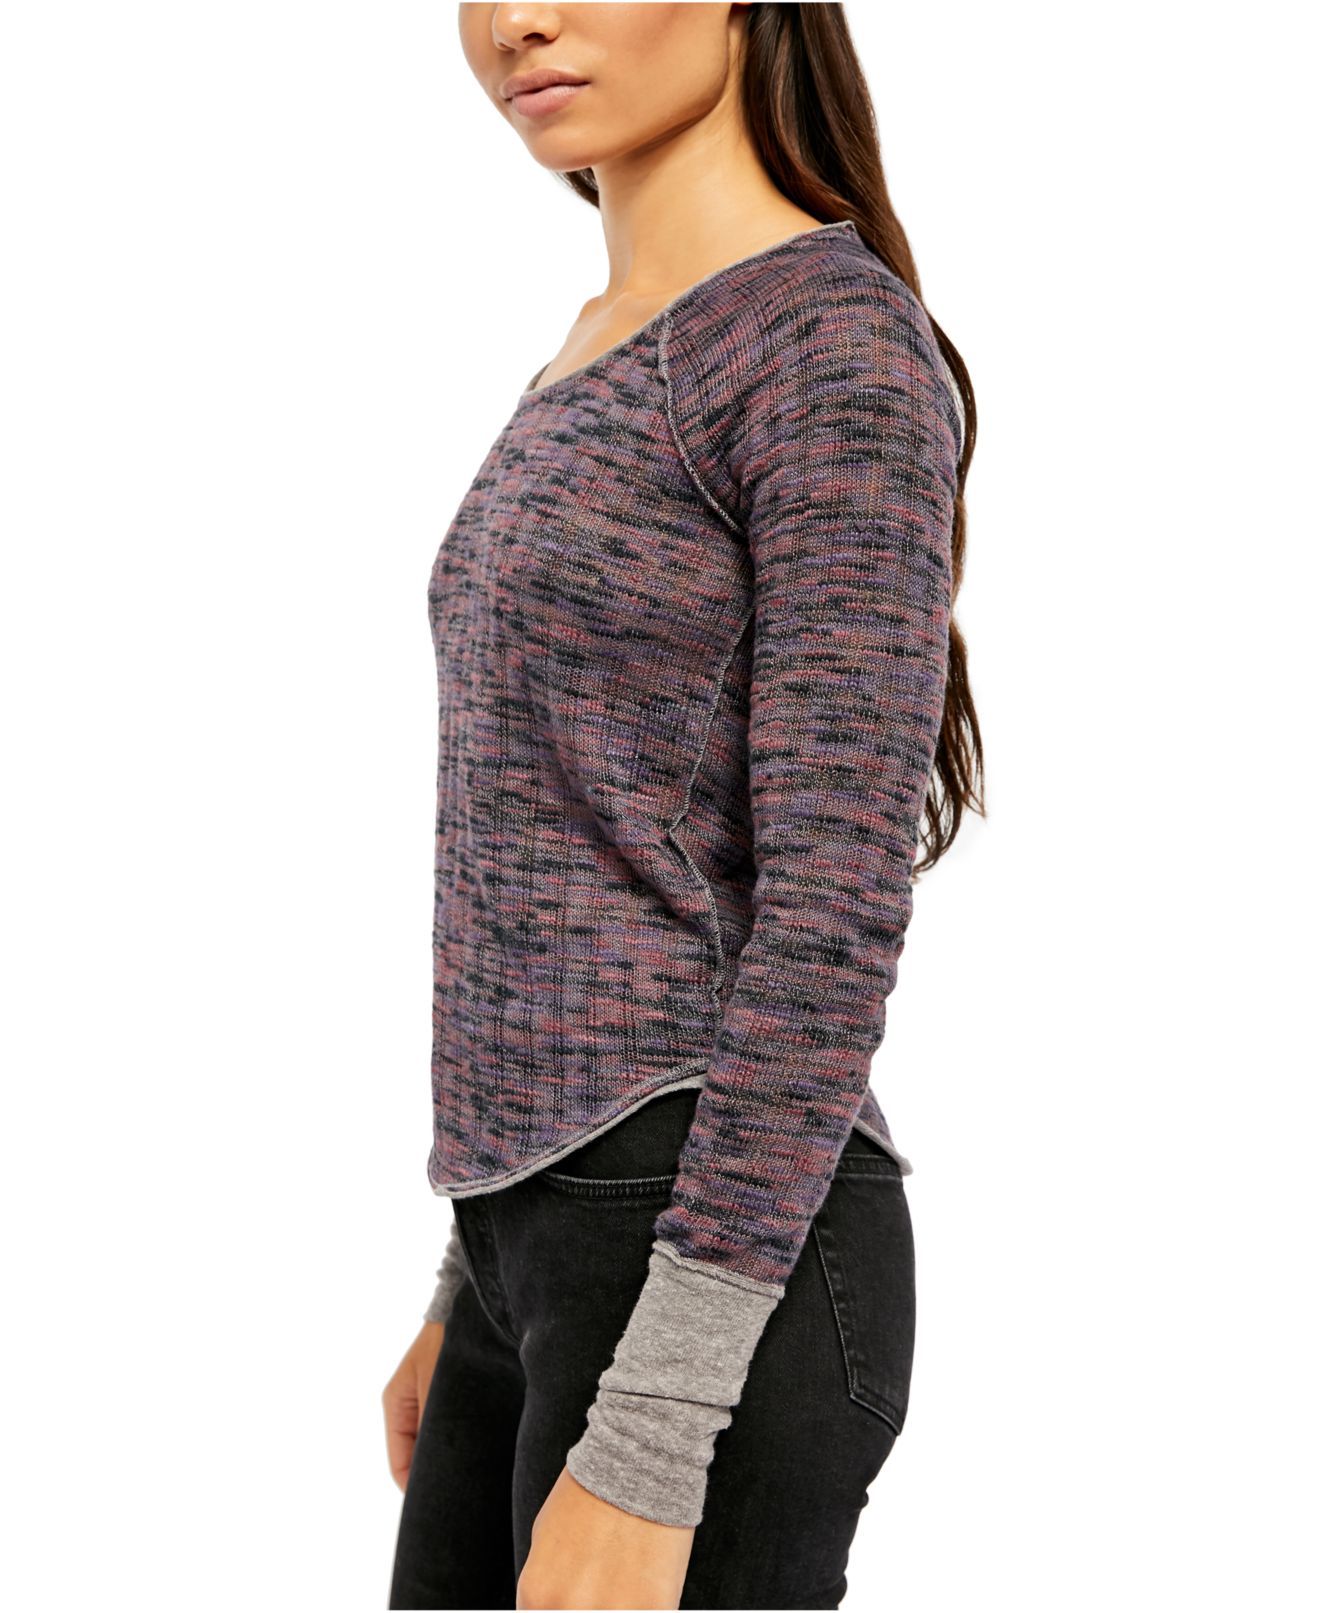 Color: Purples Size Type: Regular Size (Women's): XS Sleeve Length: Long Sleeve Type: Blouse Style: Knit Top Neckline: Round Neck Pattern: Geometric Theme: Modern Material: Cotton Blends